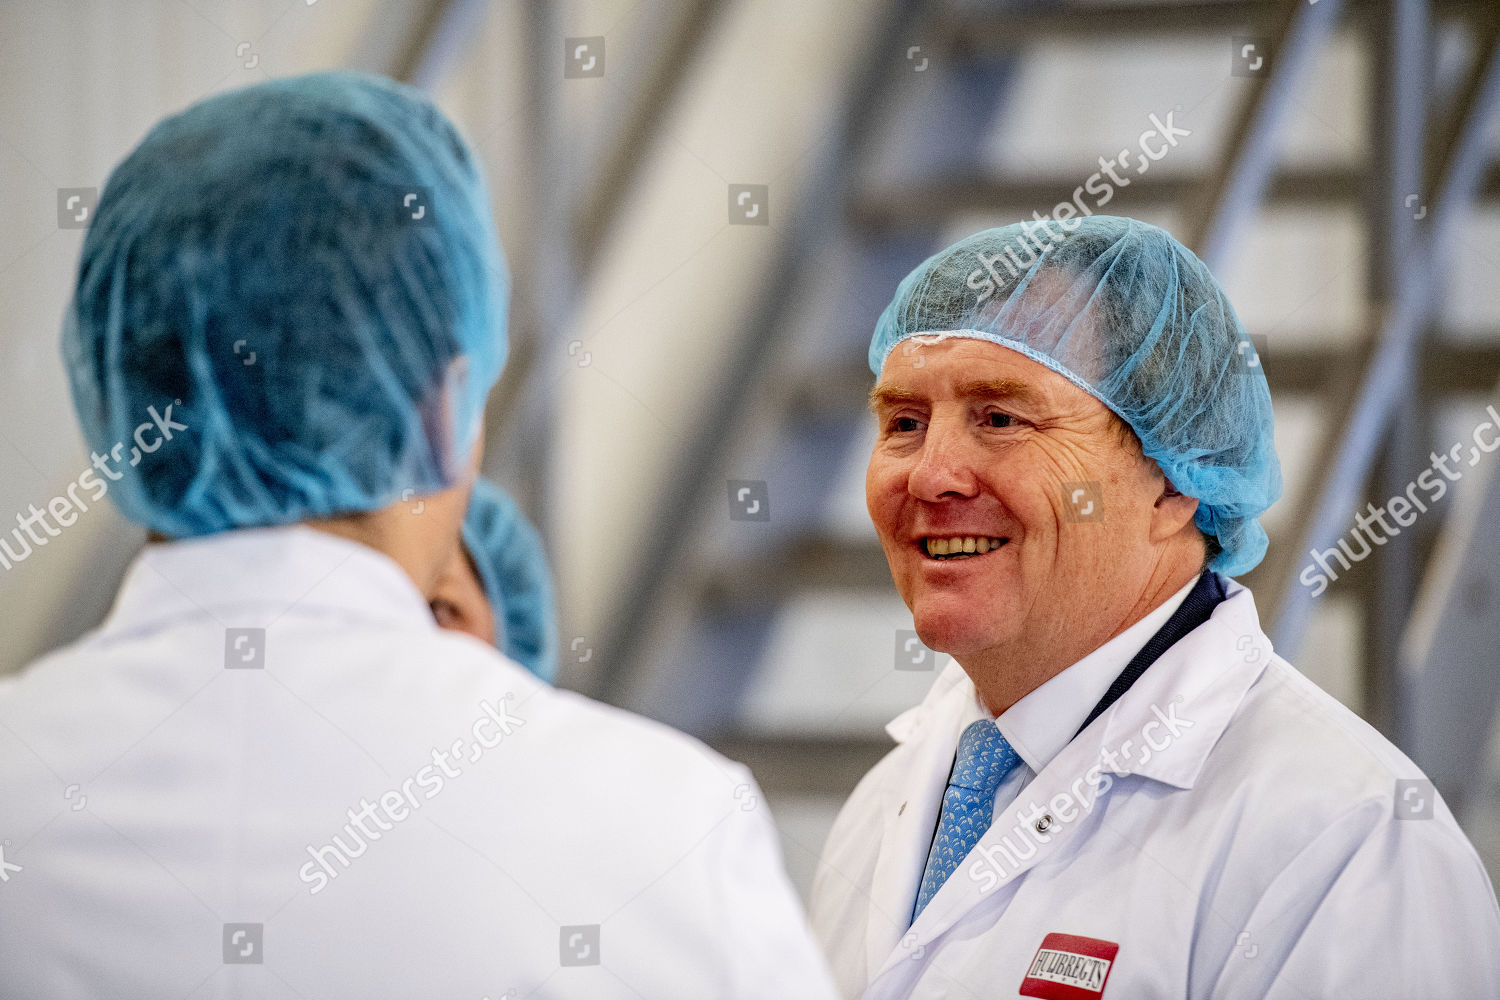 king-willem-alexander-is-making-a-working-visit-to-two-companies-in-brainport-eindhoven-helmond-the-netherlands-shutterstock-editorial-10031459u.jpg